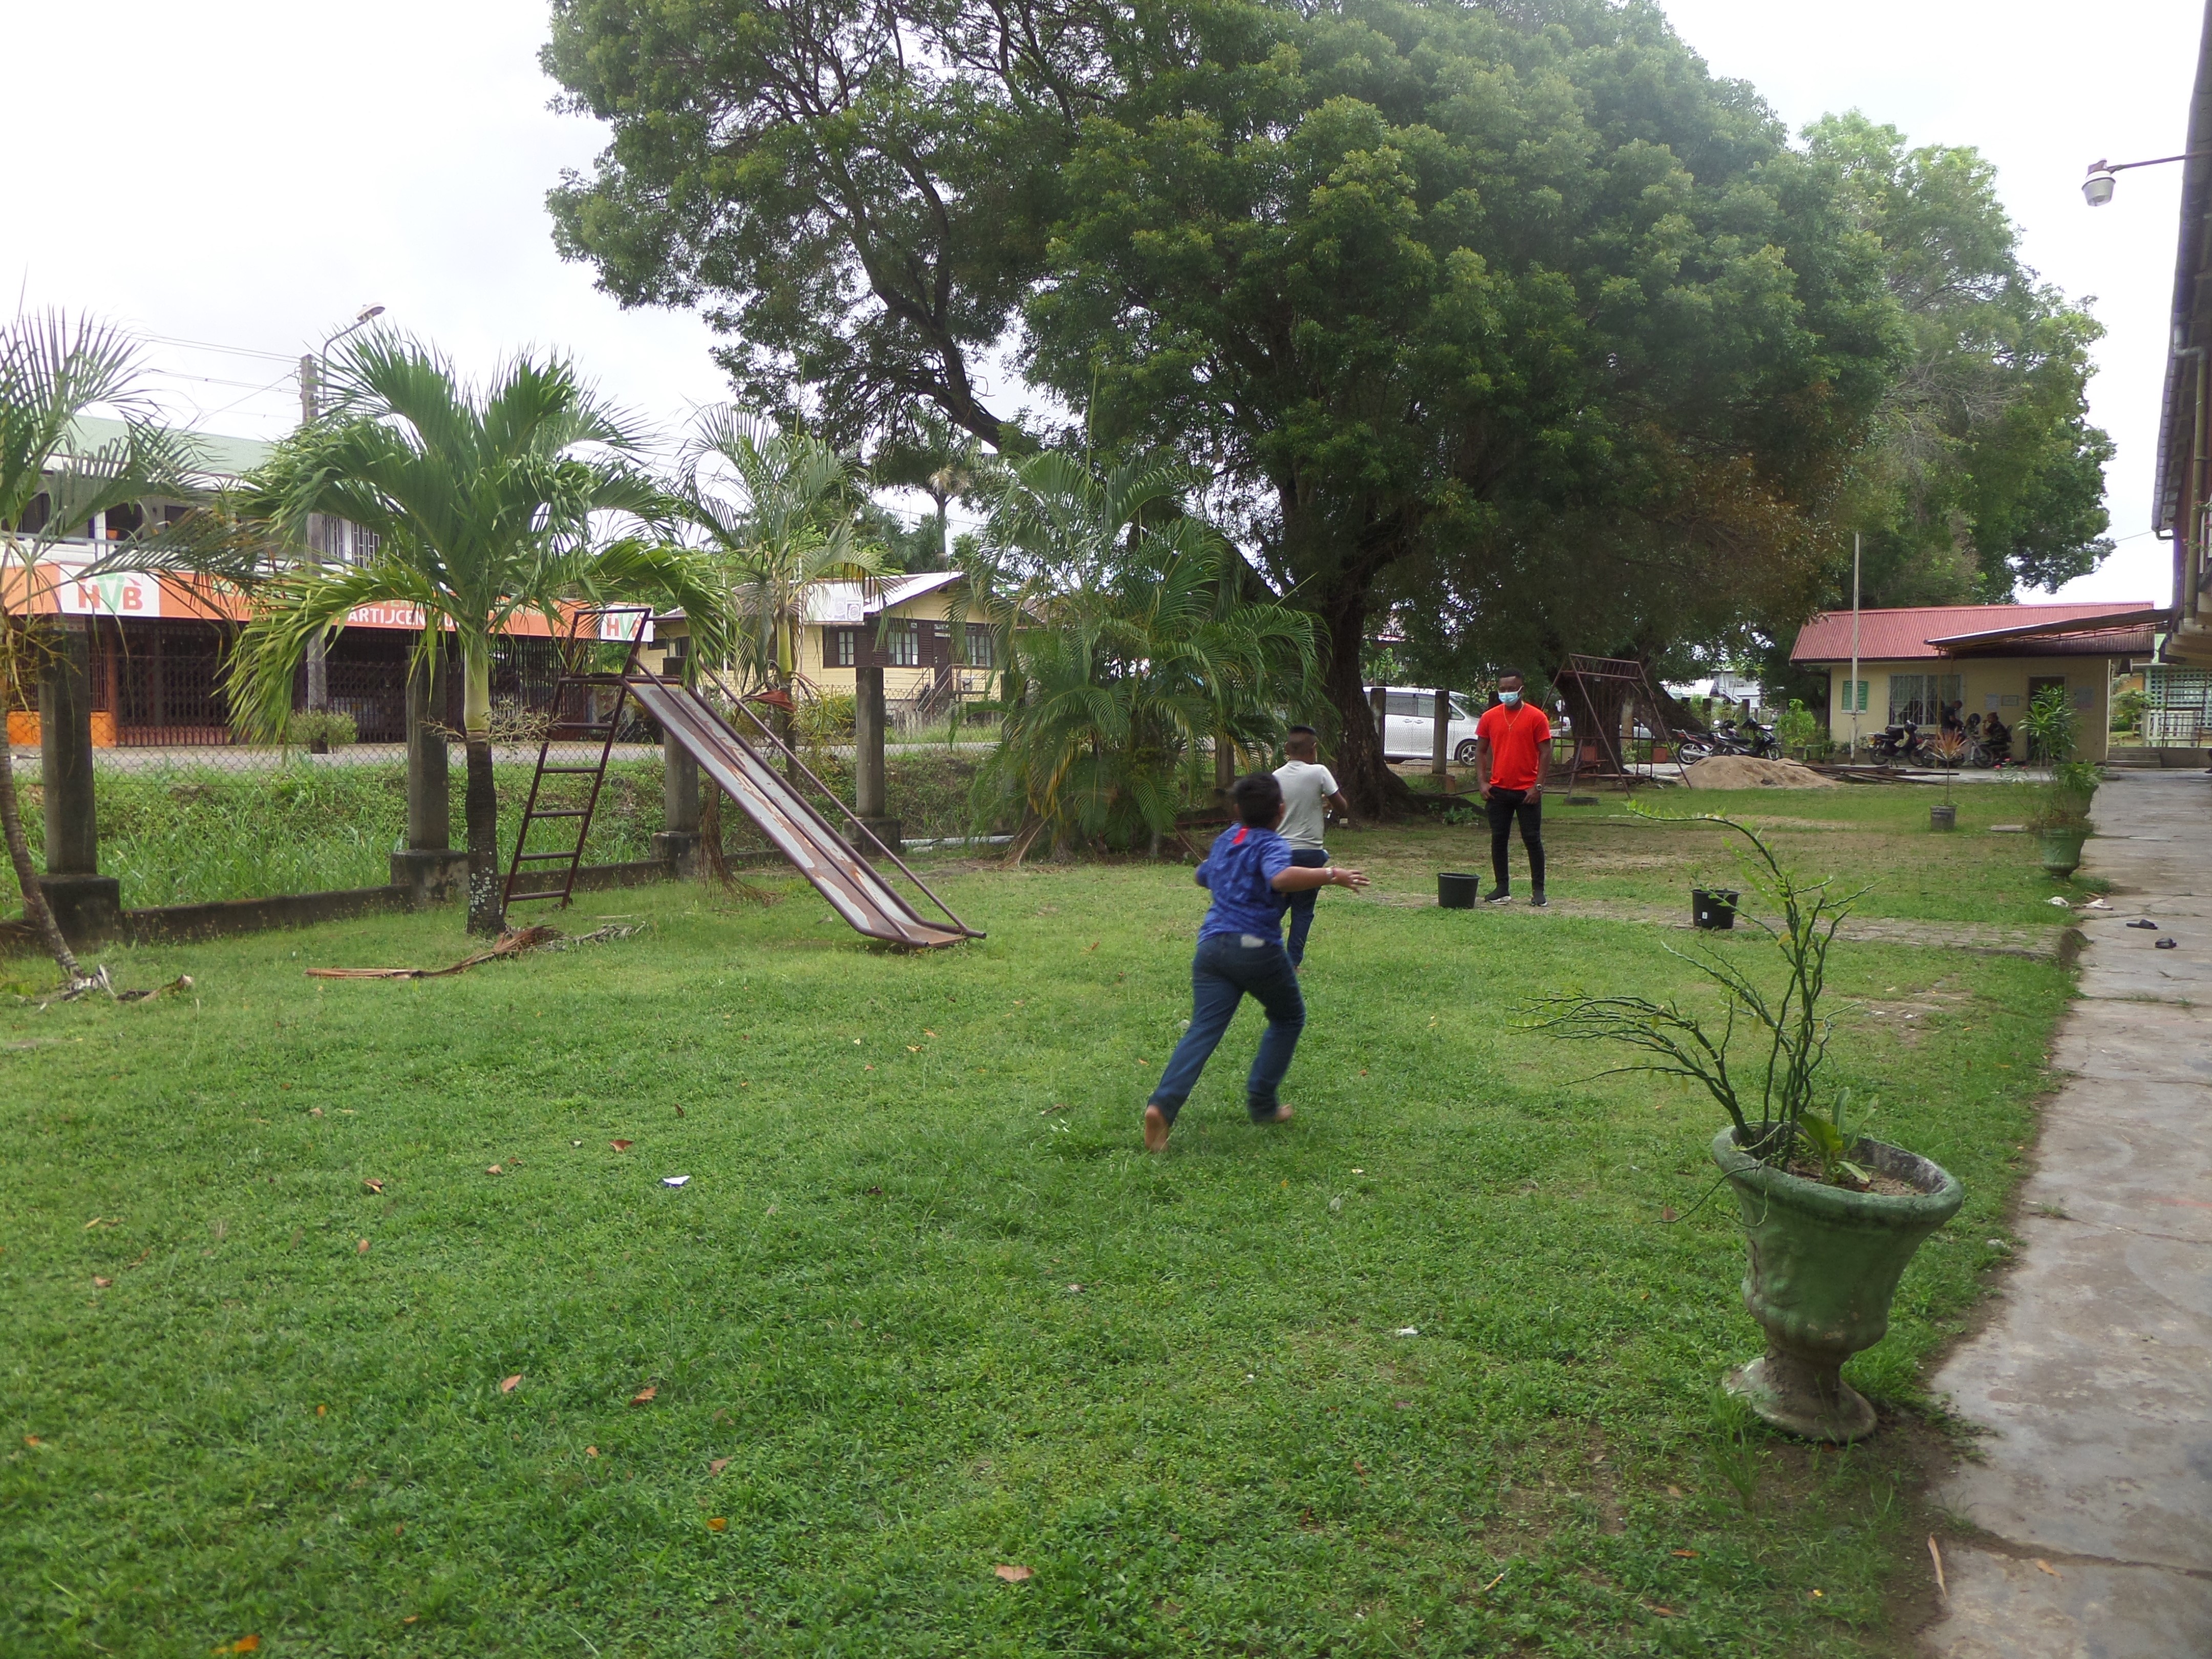 GLOBE Suriname students engaged in a summer vacation activity outside